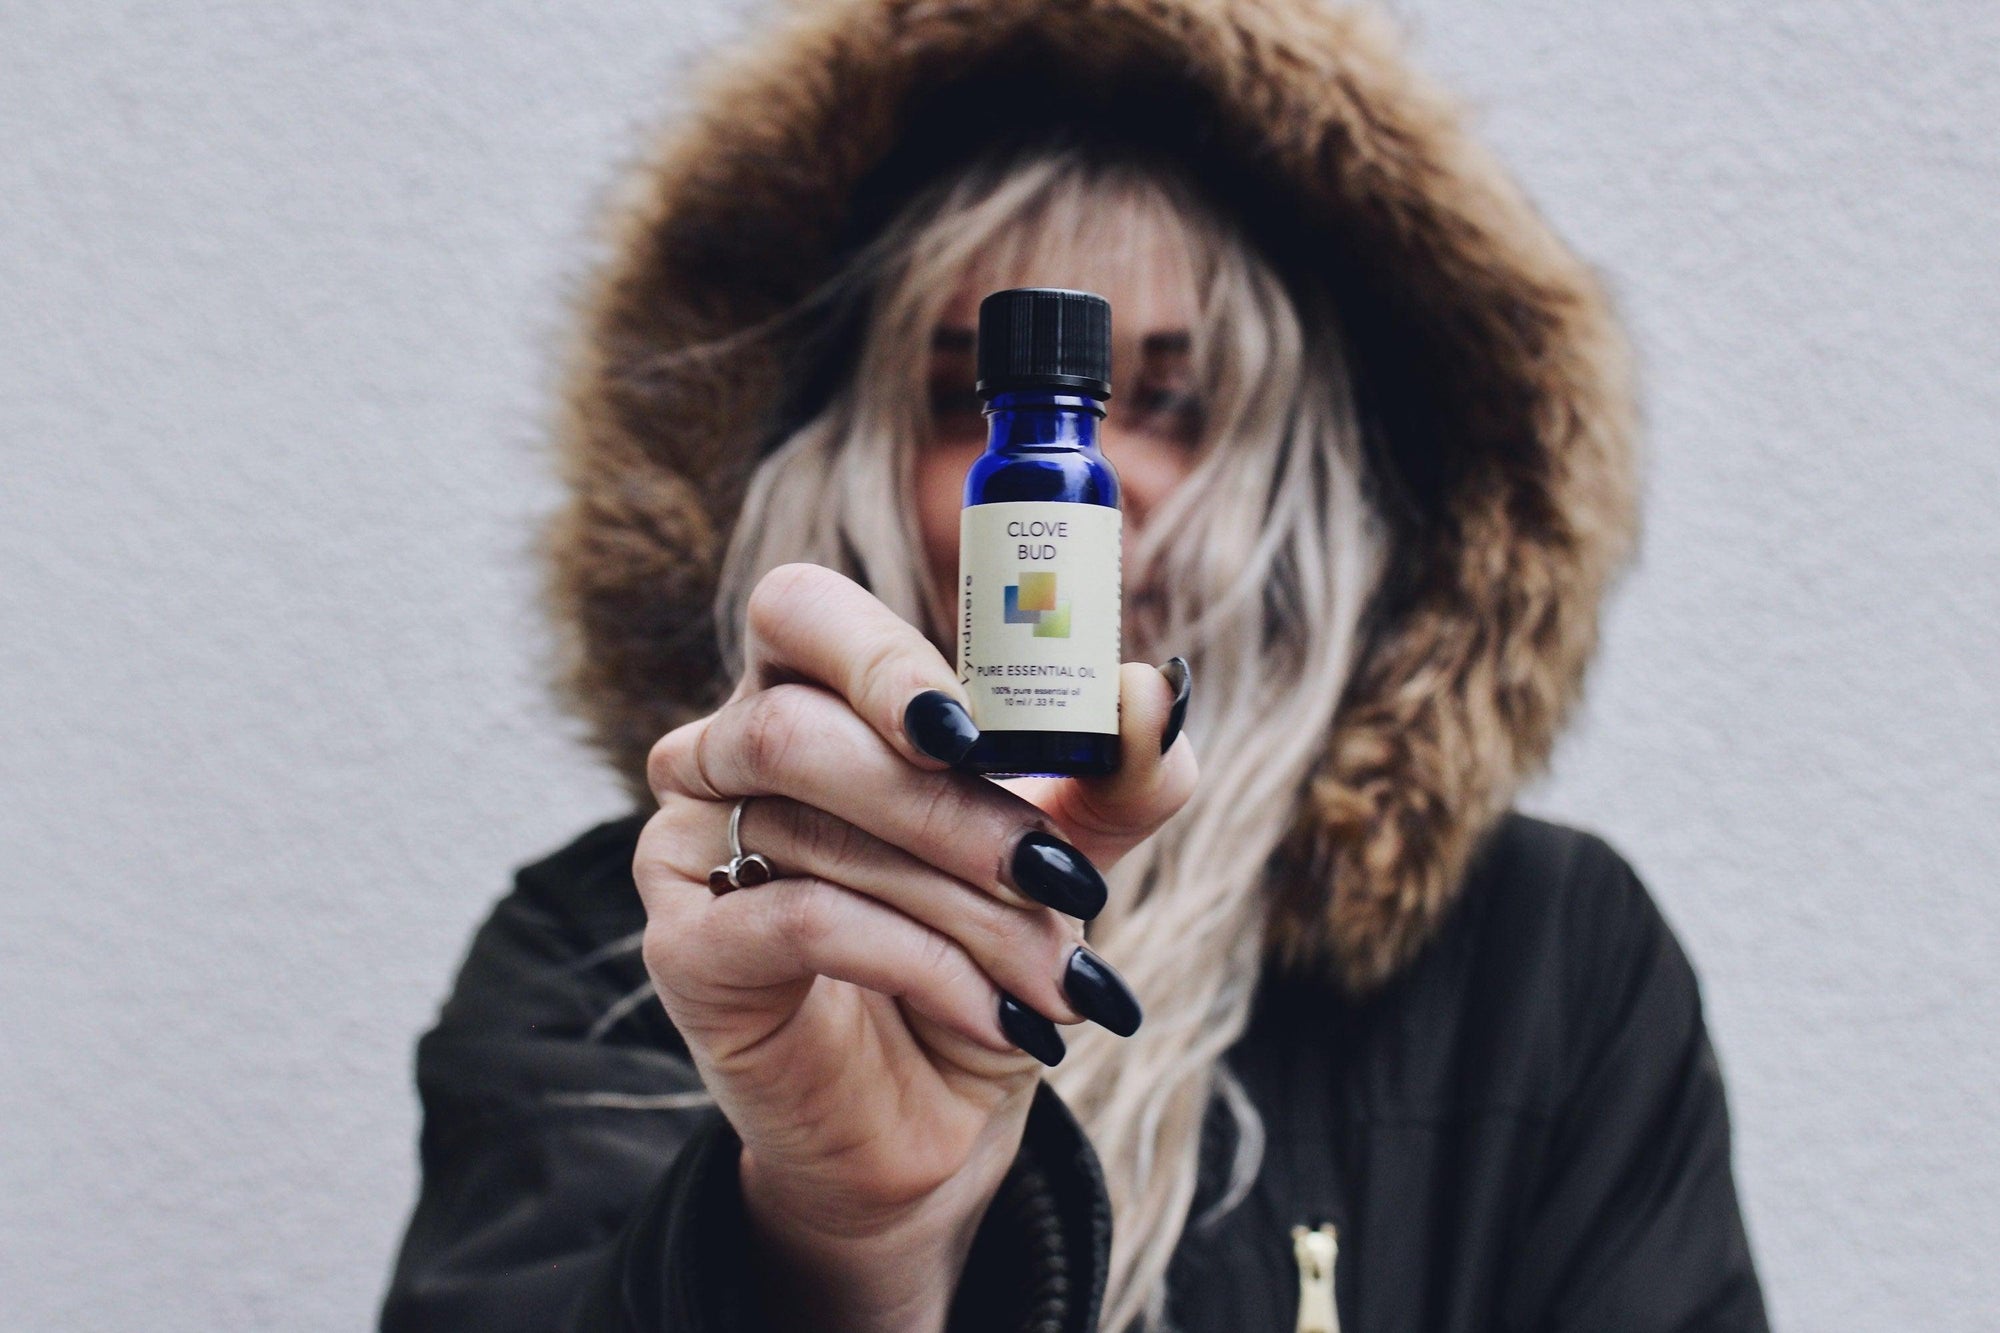 Woman with hooded coat holding a bottle of Wyndmere clove bud essential oil